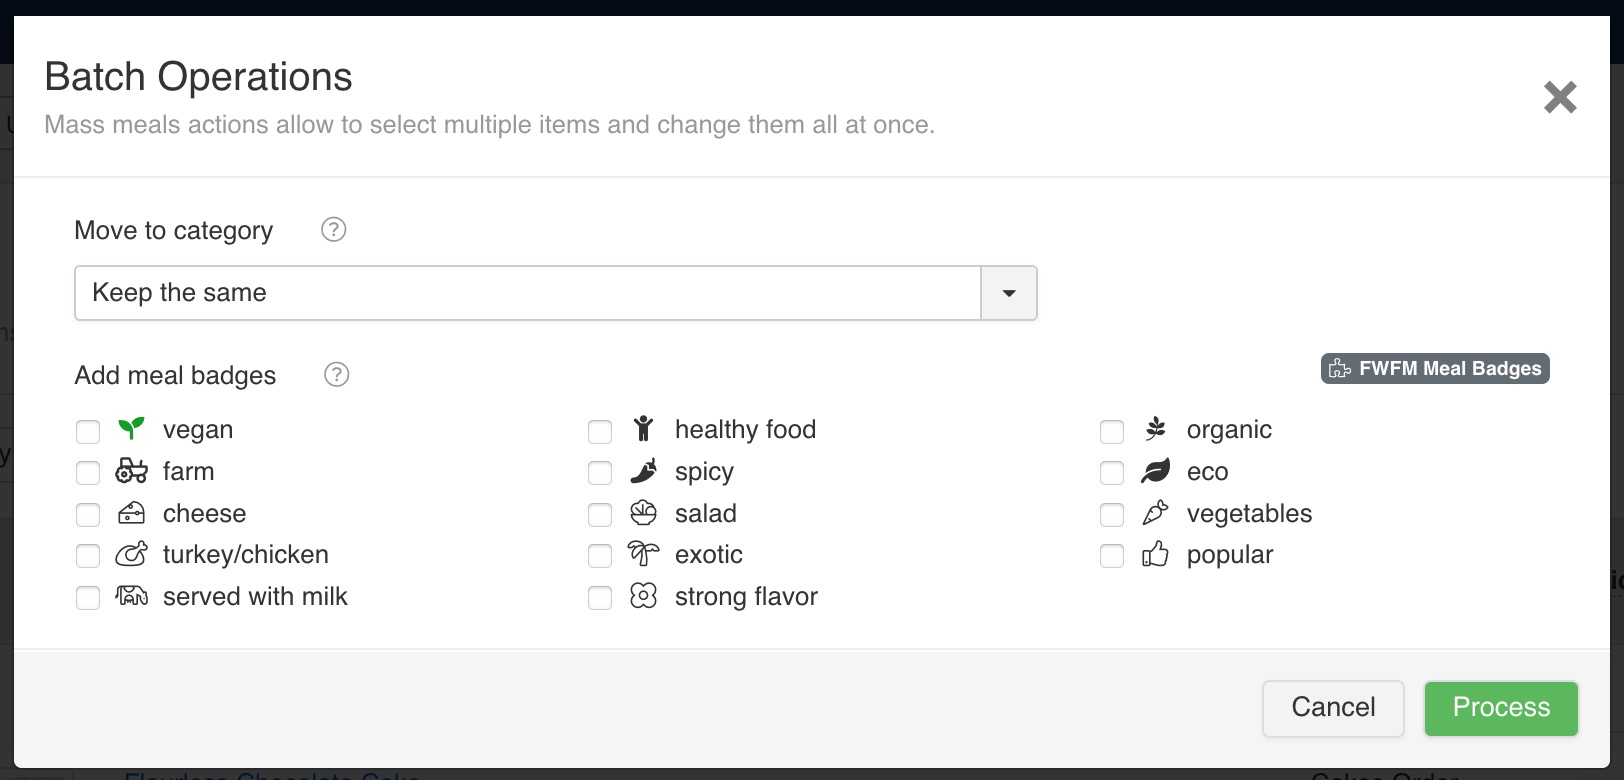 Mass meals actions allow to select multiple items and change them all at once.